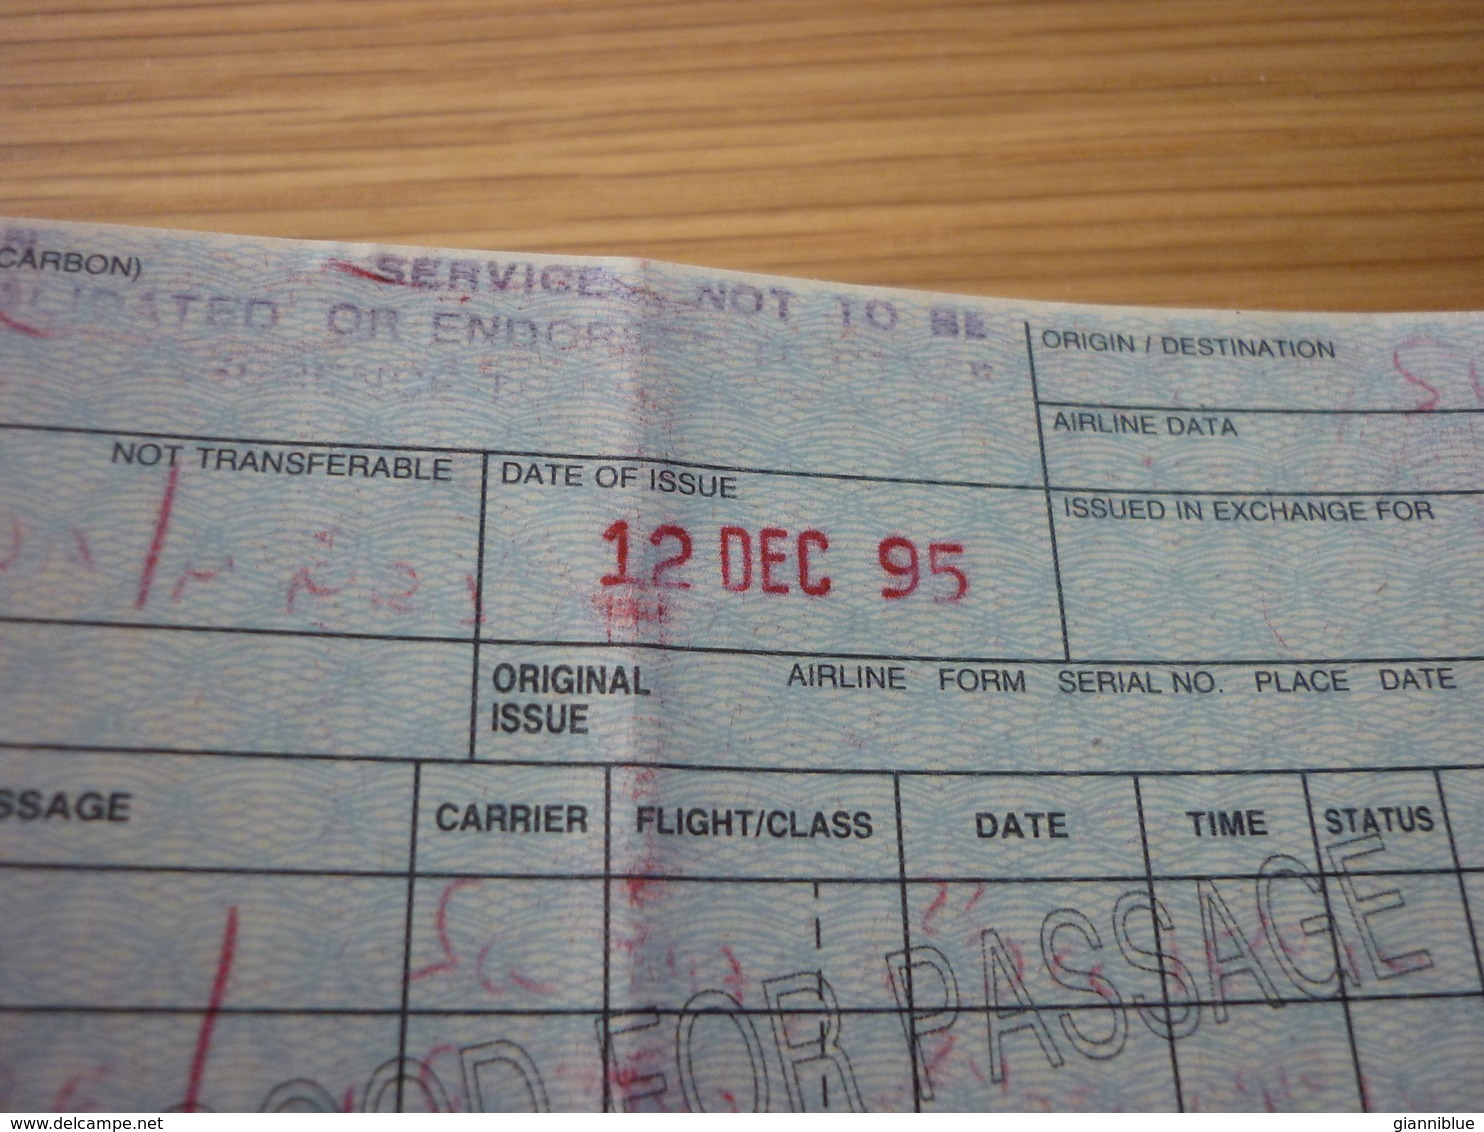 Greece Greek Athens-Singapore Singapore Airlines old '90s passenger ticket and baggage check